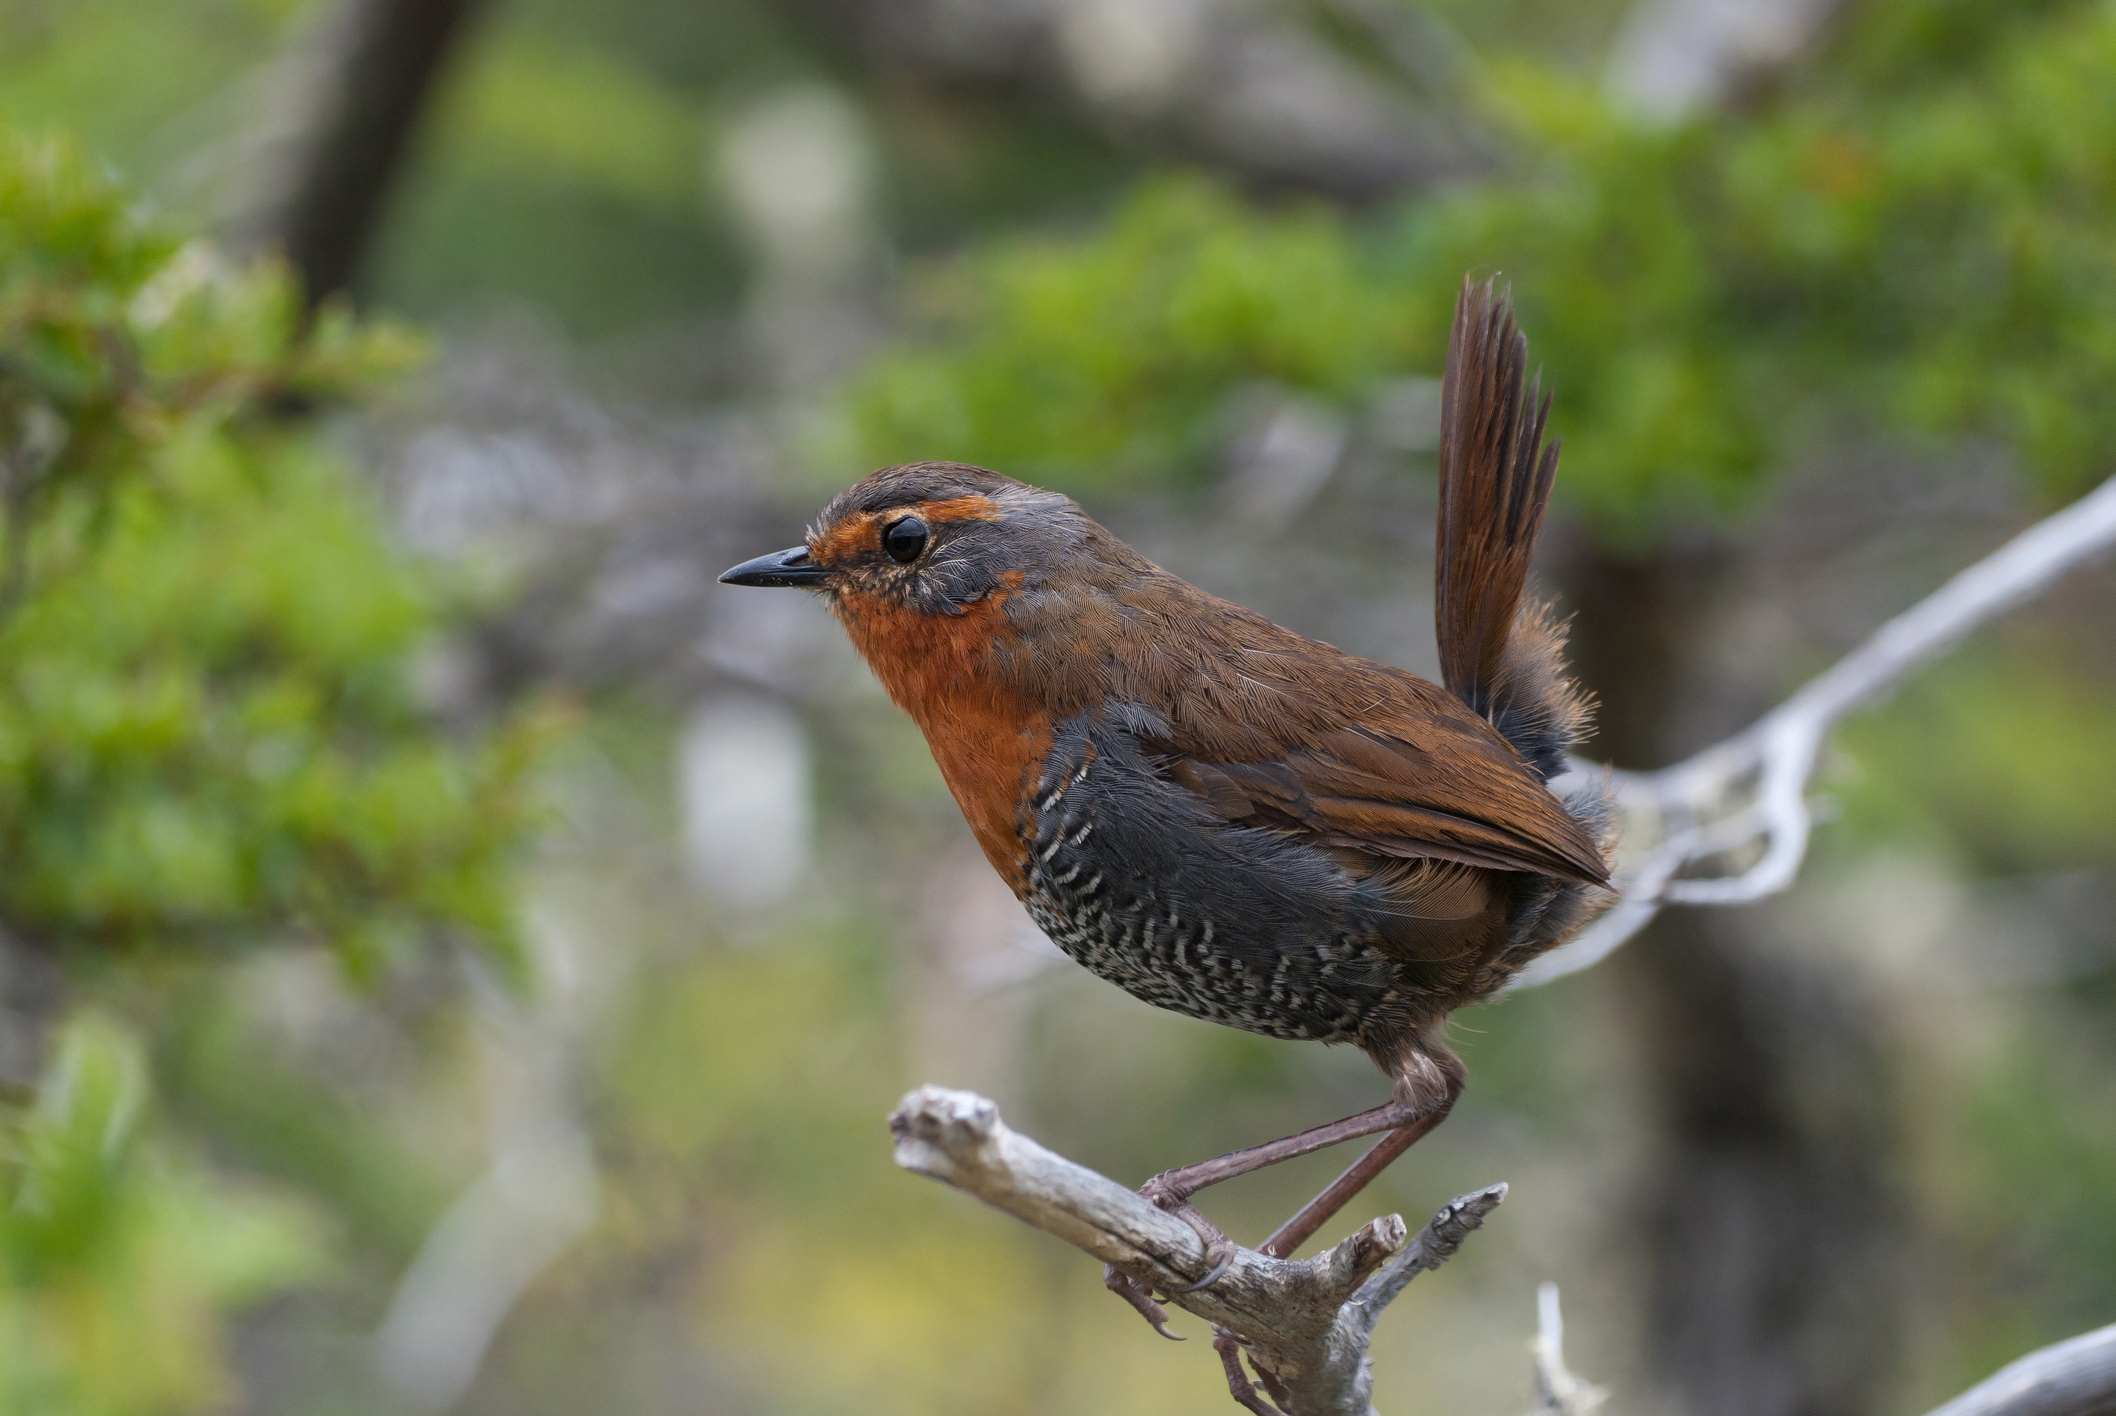 a small brown and red bird perched on a branch